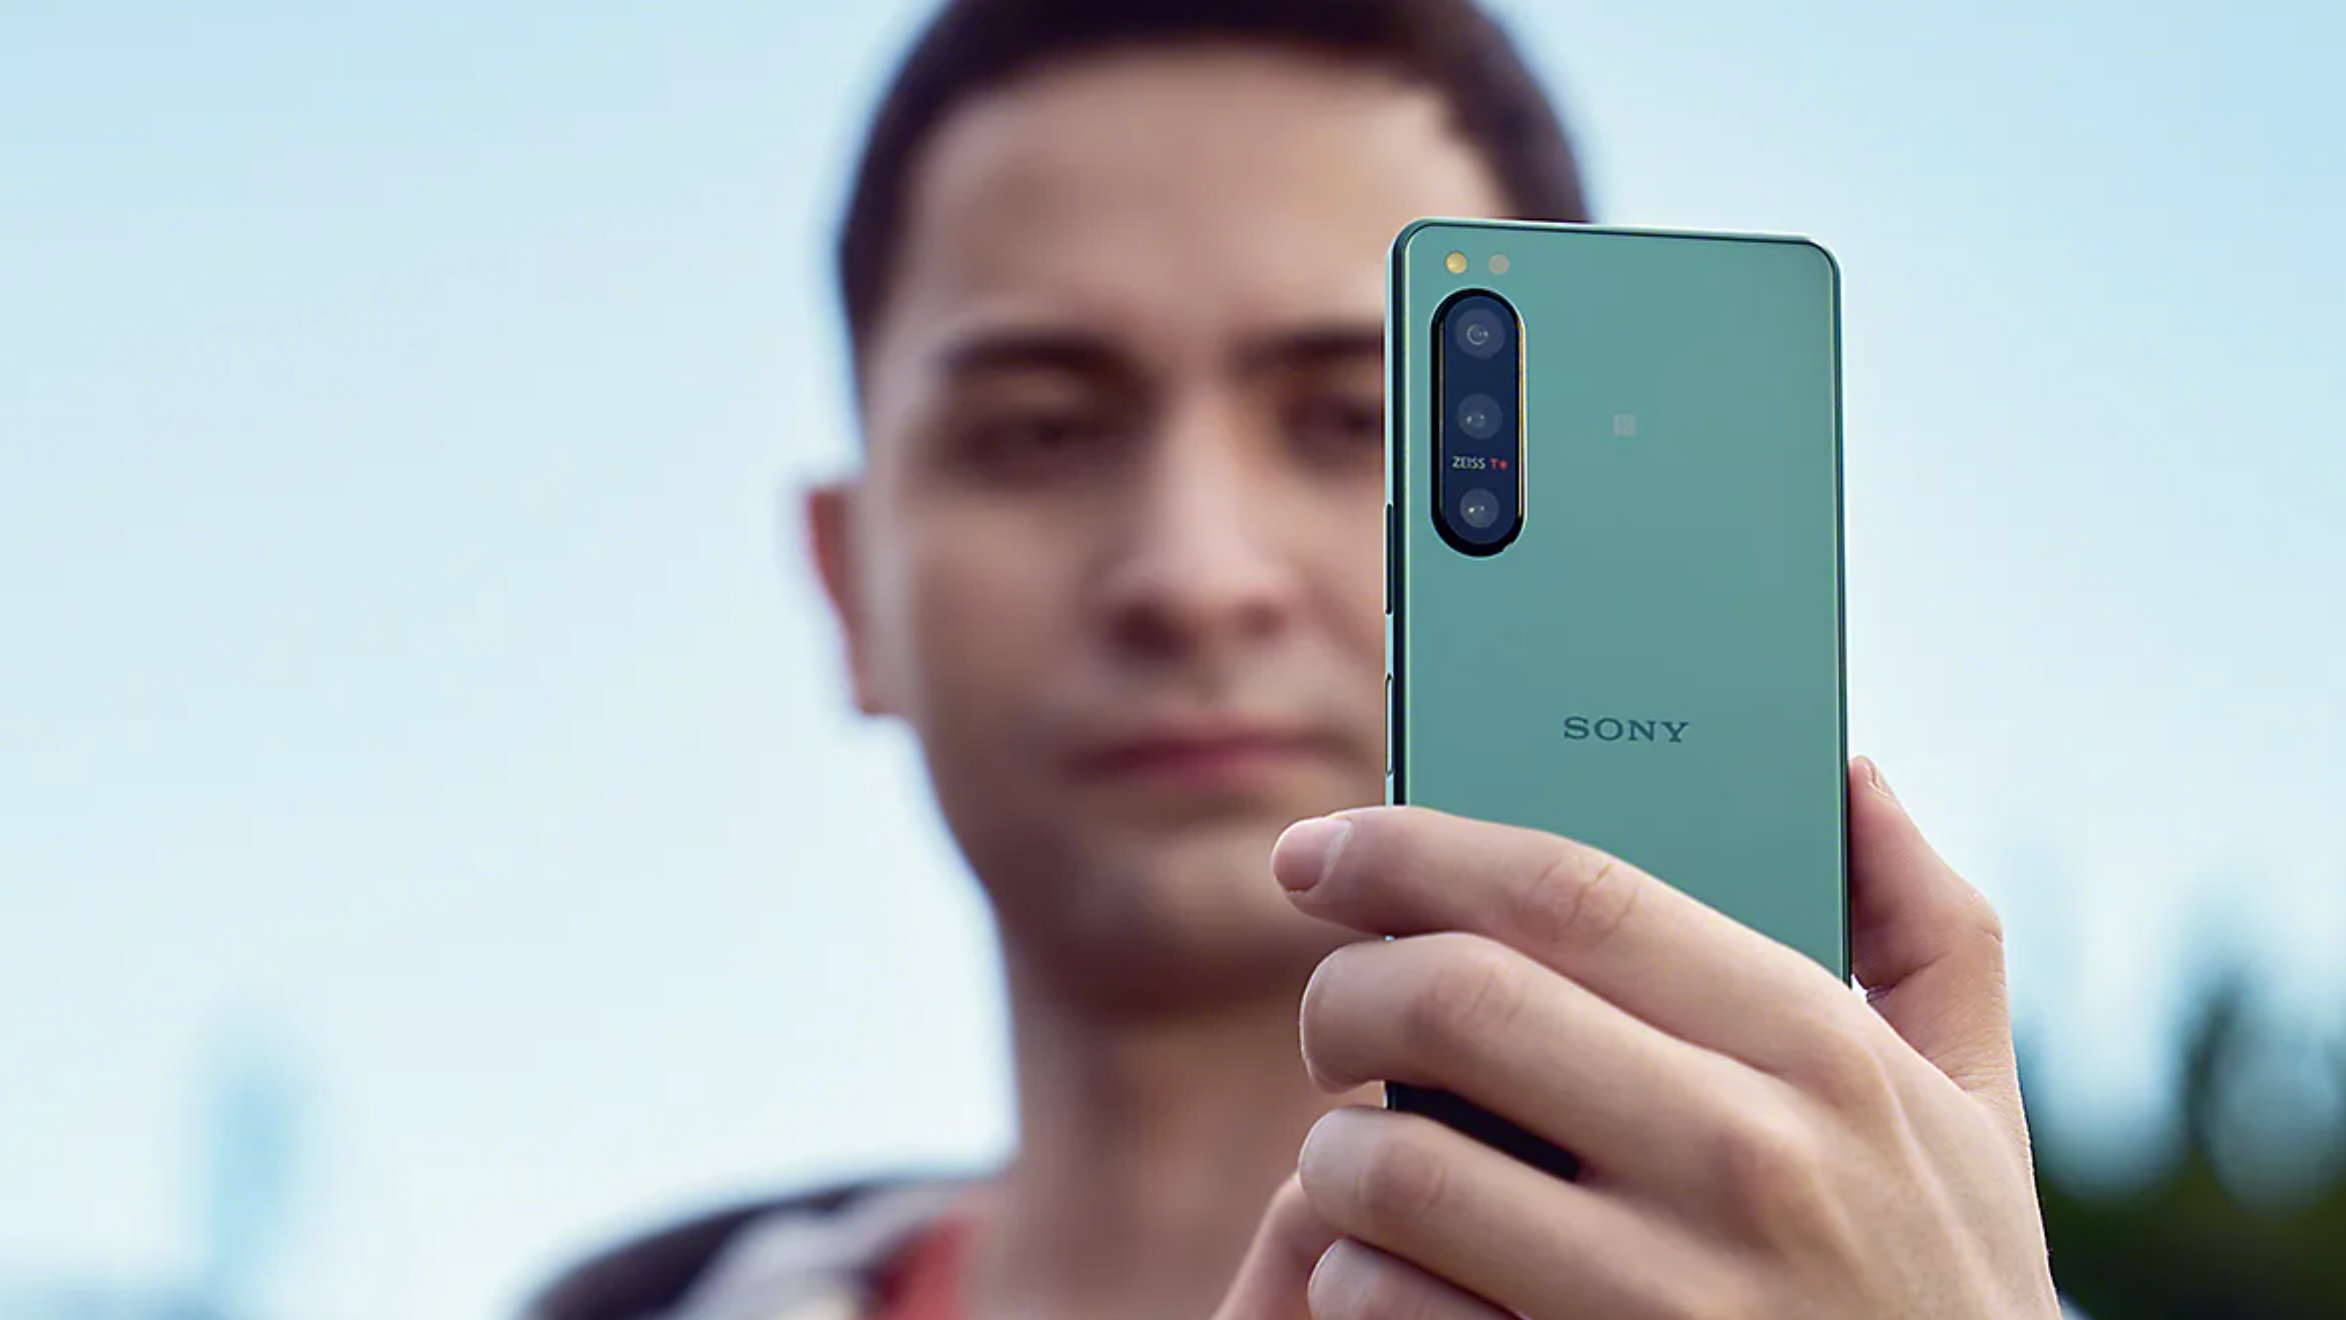 Sony Xperia 5 V: The compact Android flagship gets a big camera upgrade